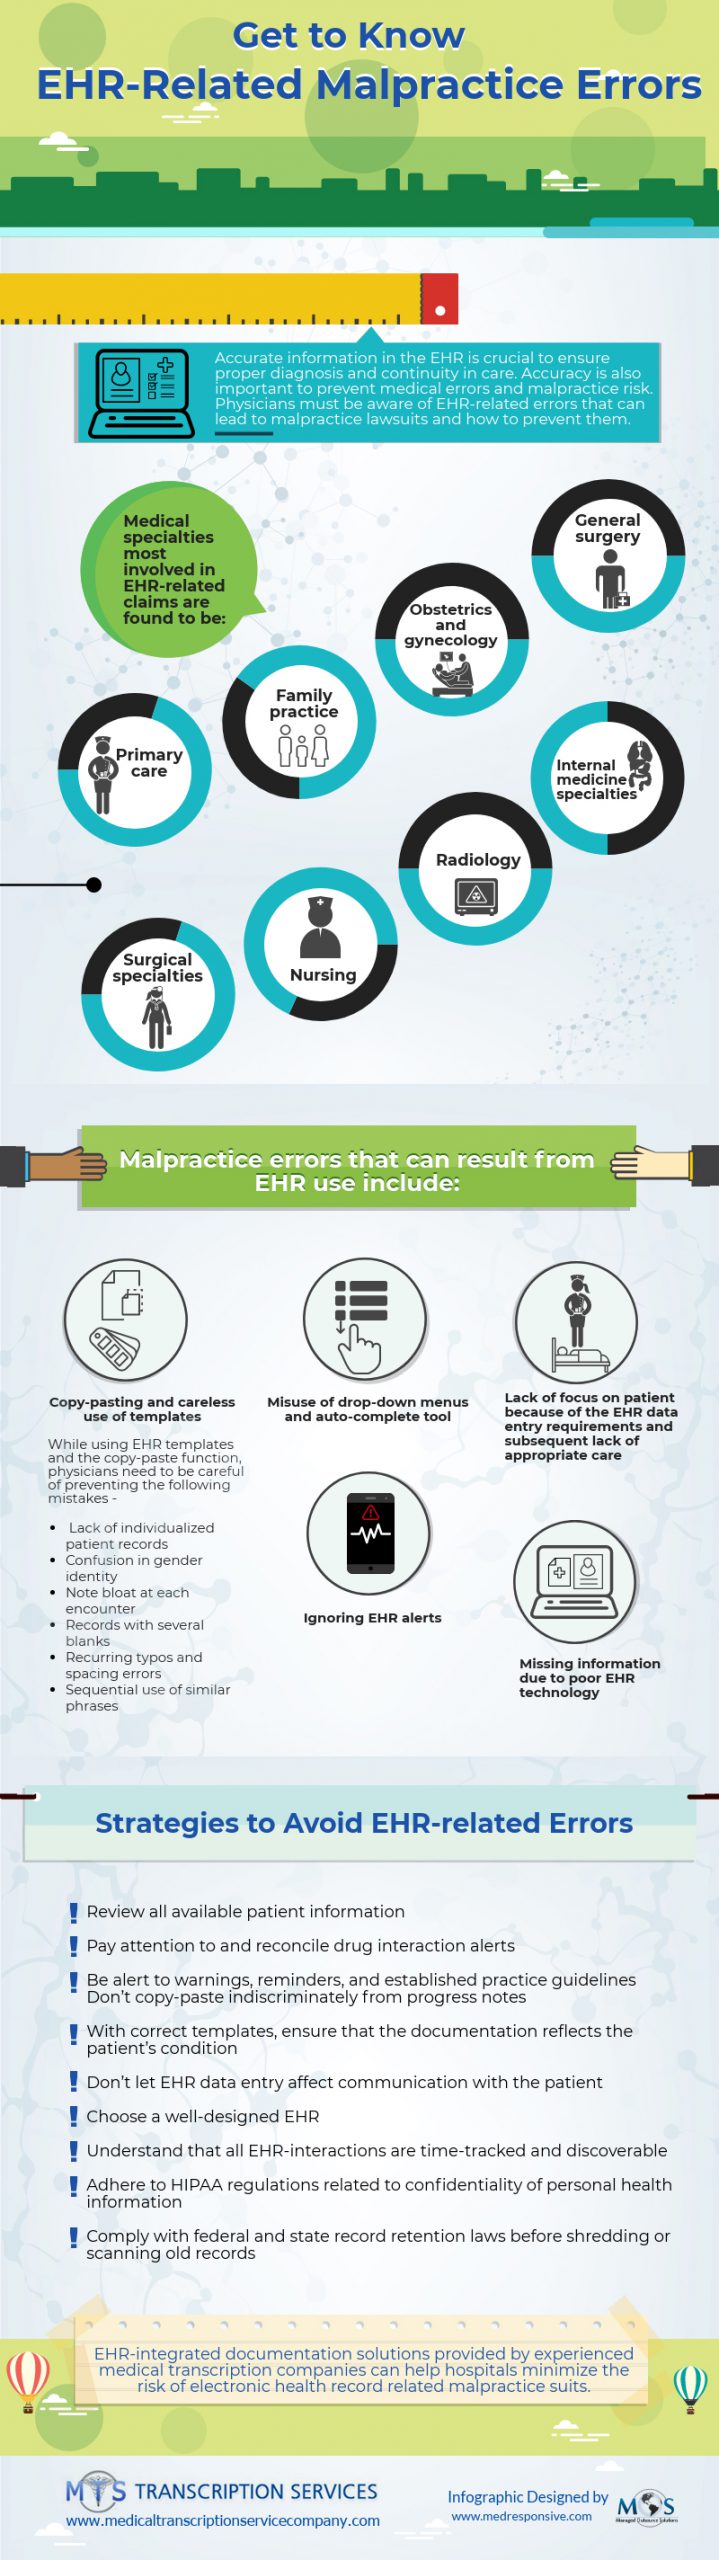 Get to Know EHR-Related Malpractice Errors [Infographics]